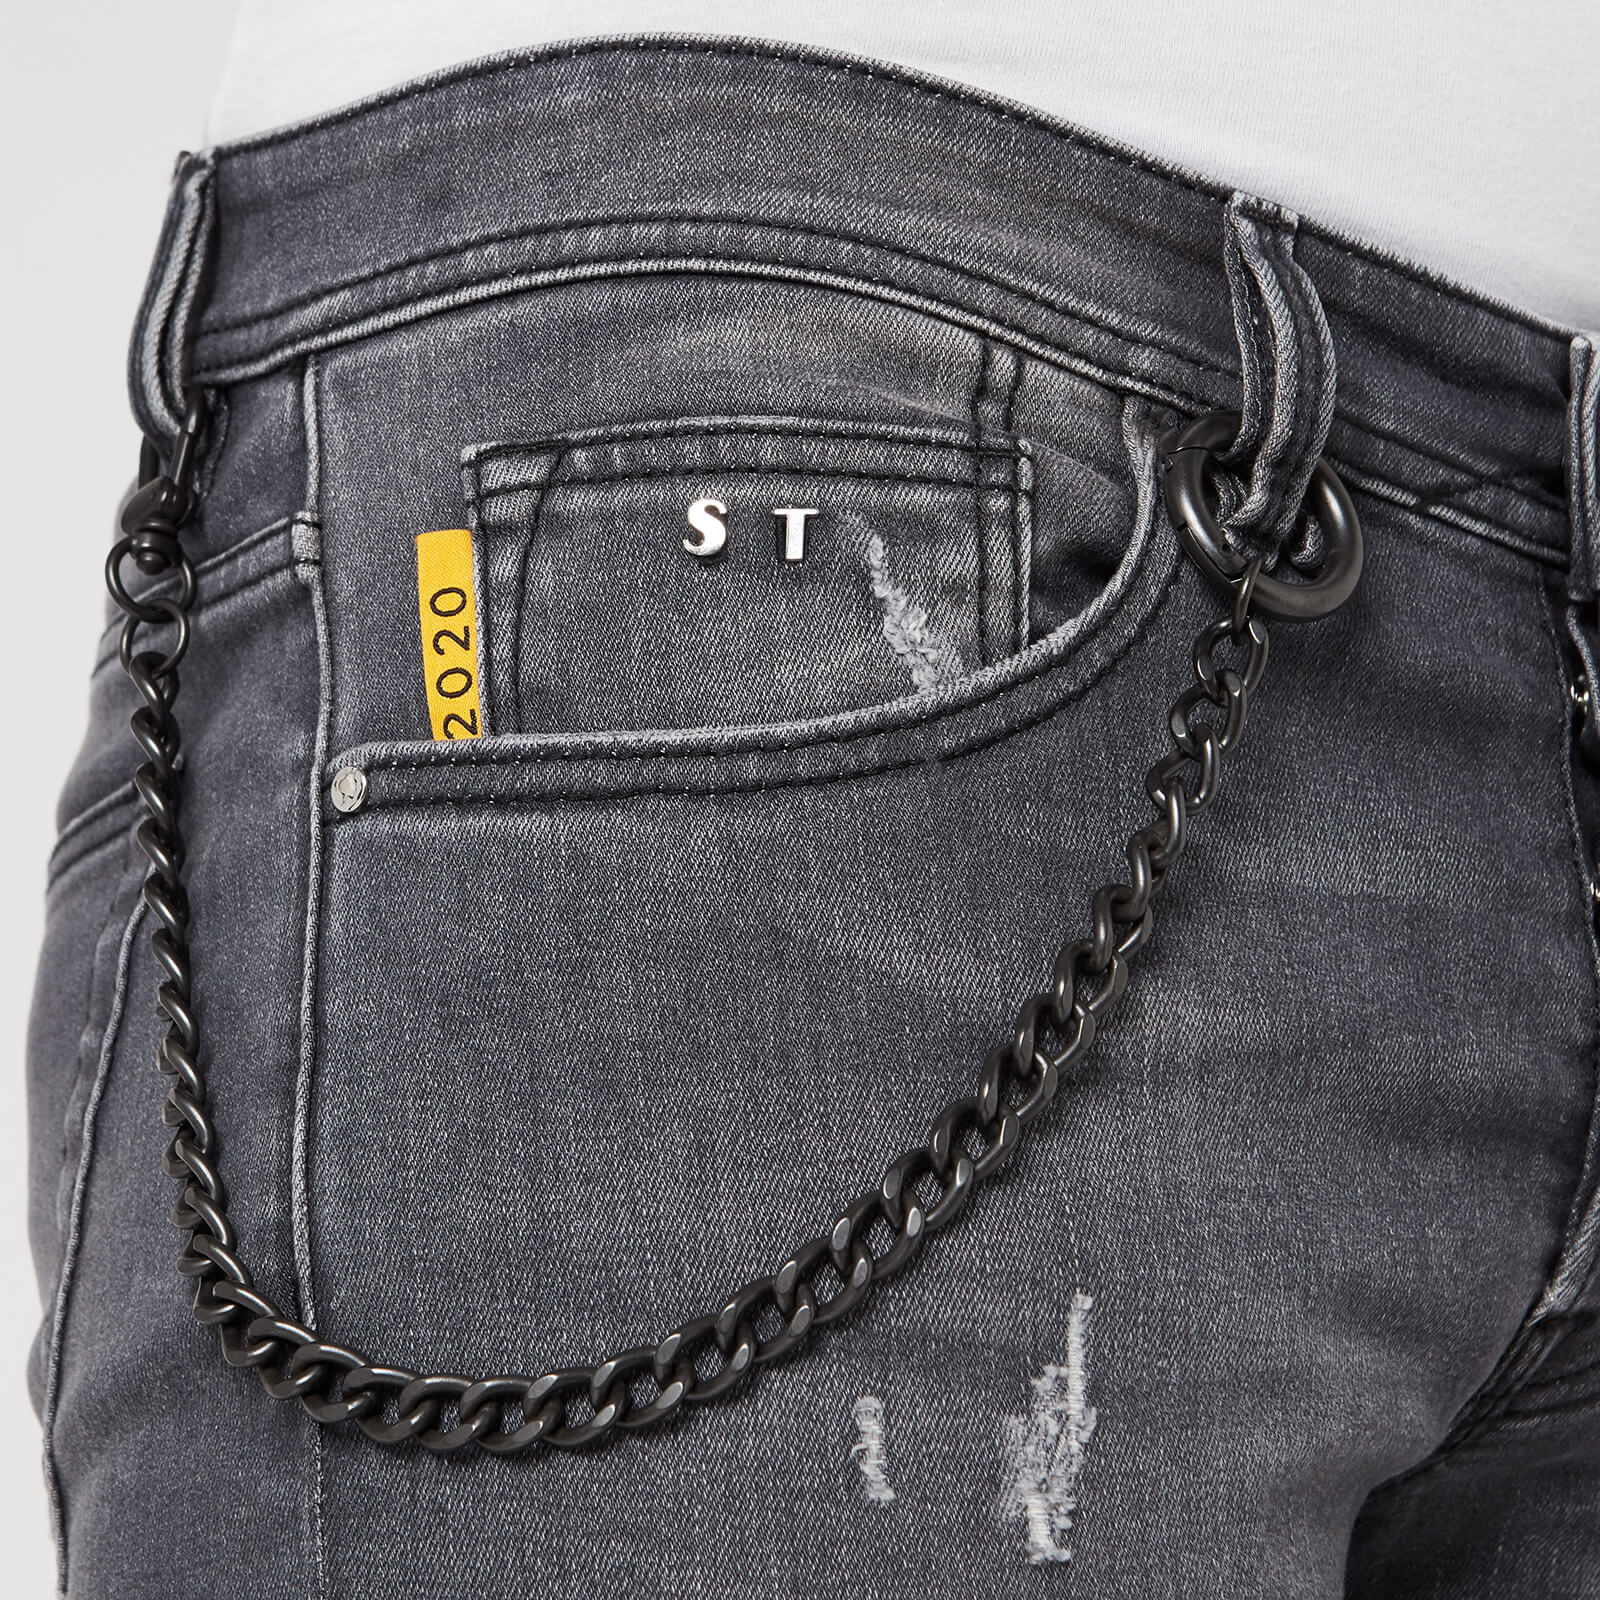 Accompany pamper Diplomatic issues A Guide To Tramarossa Jeans | Origins, Sizing and Styles - The Hut